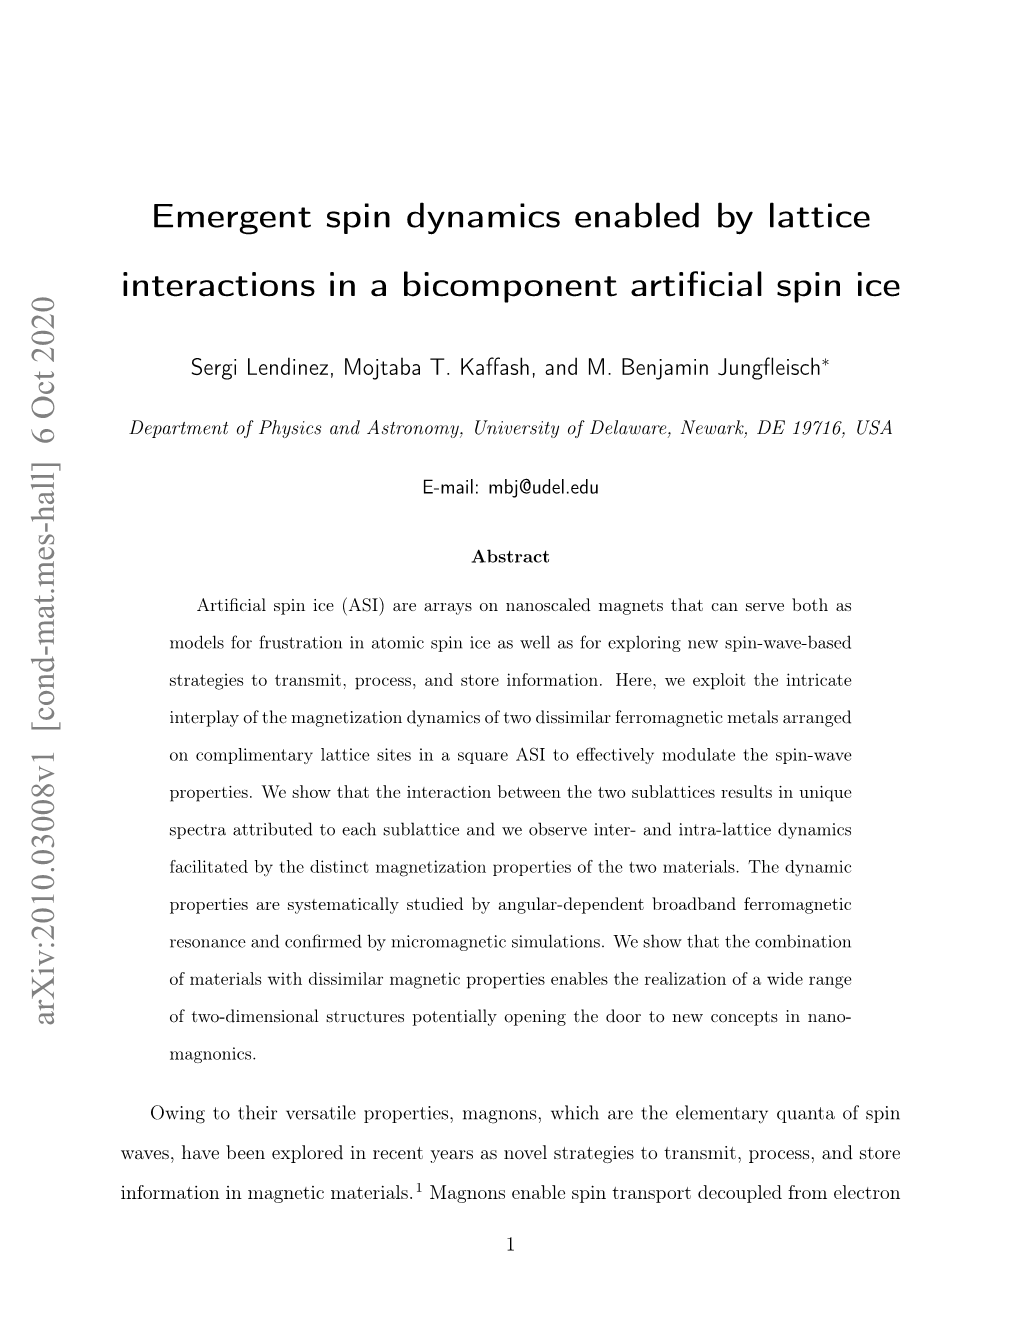 Emergent Spin Dynamics Enabled by Lattice Interactions in a Bicomponent Artiﬁcial Spin Ice